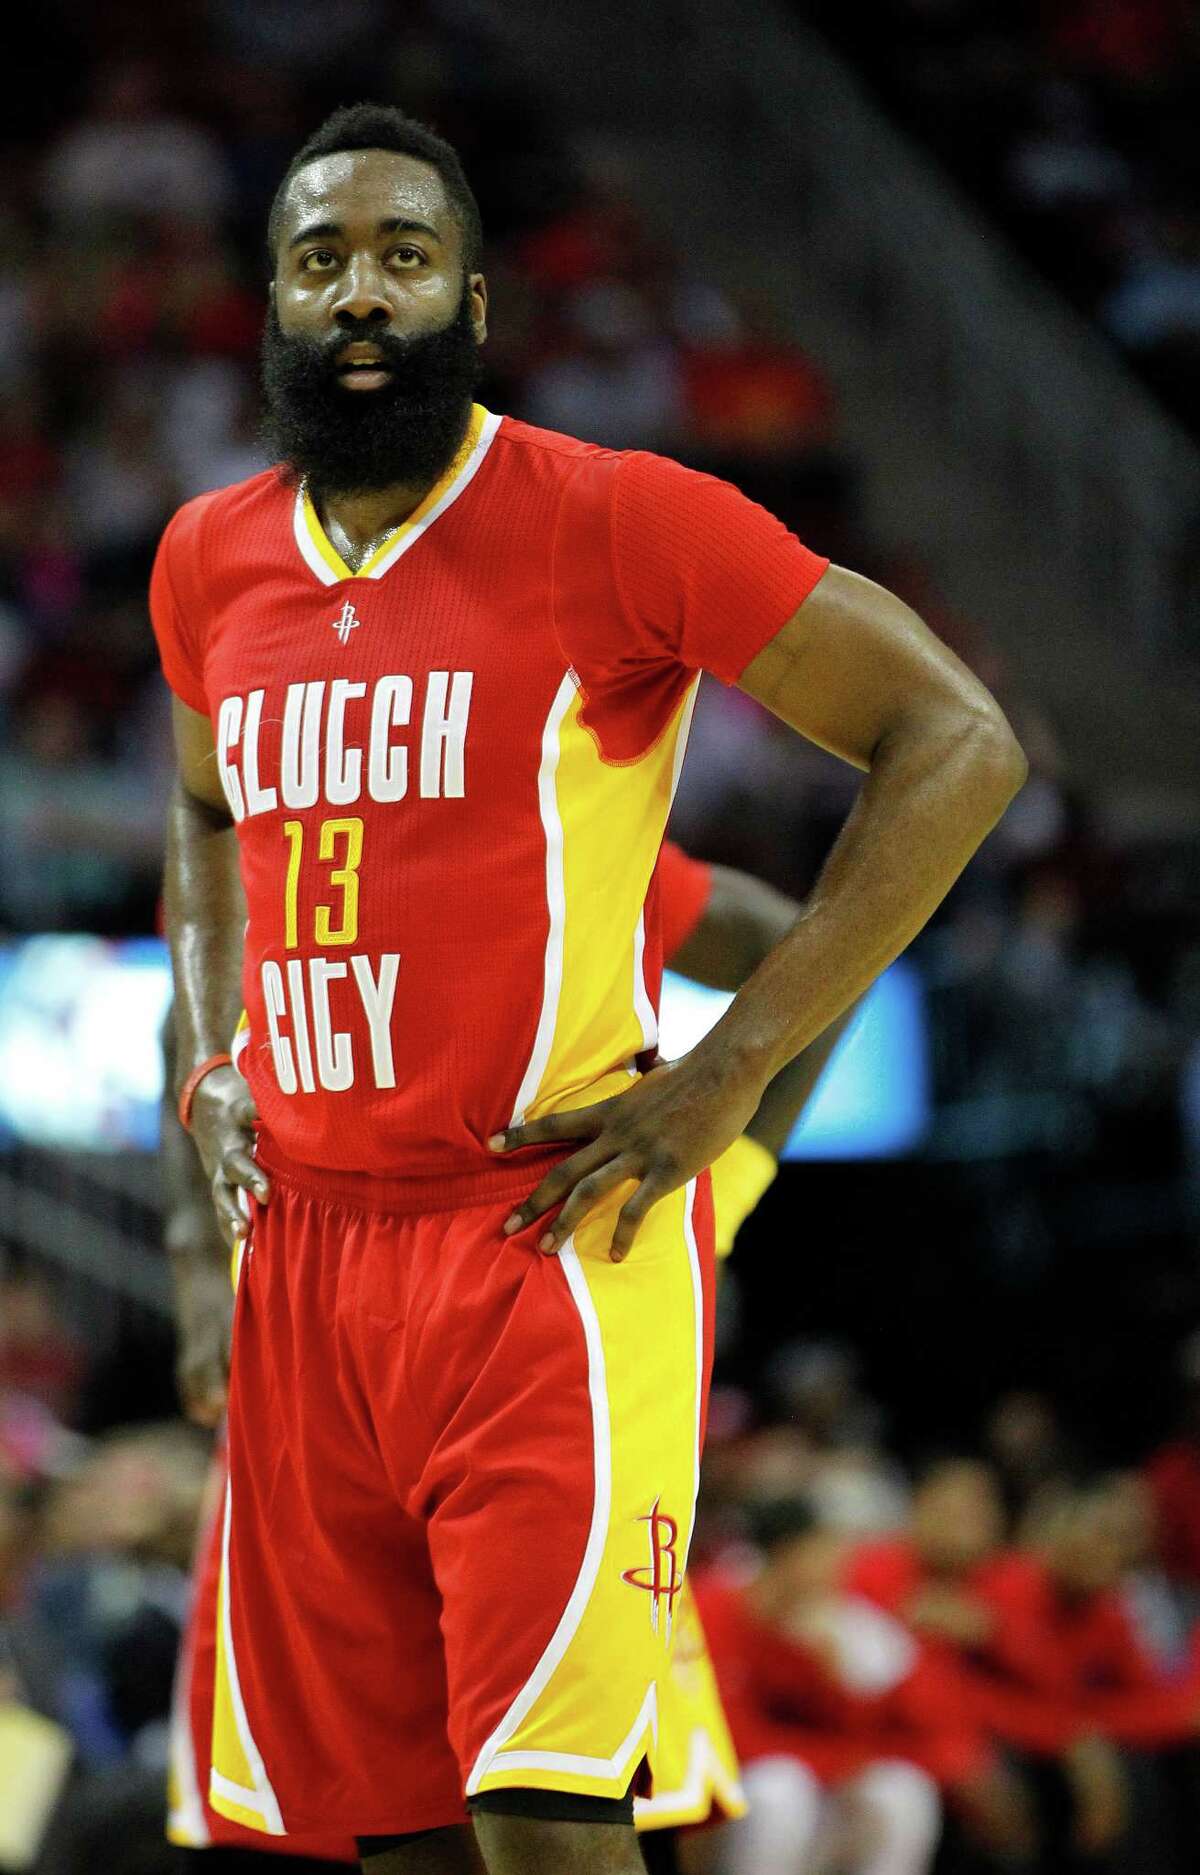 Houston Rockets guard James Harden (13) during the first half of an NBA basketball game at Toyota Center, Wednesday, March 16, 2016.